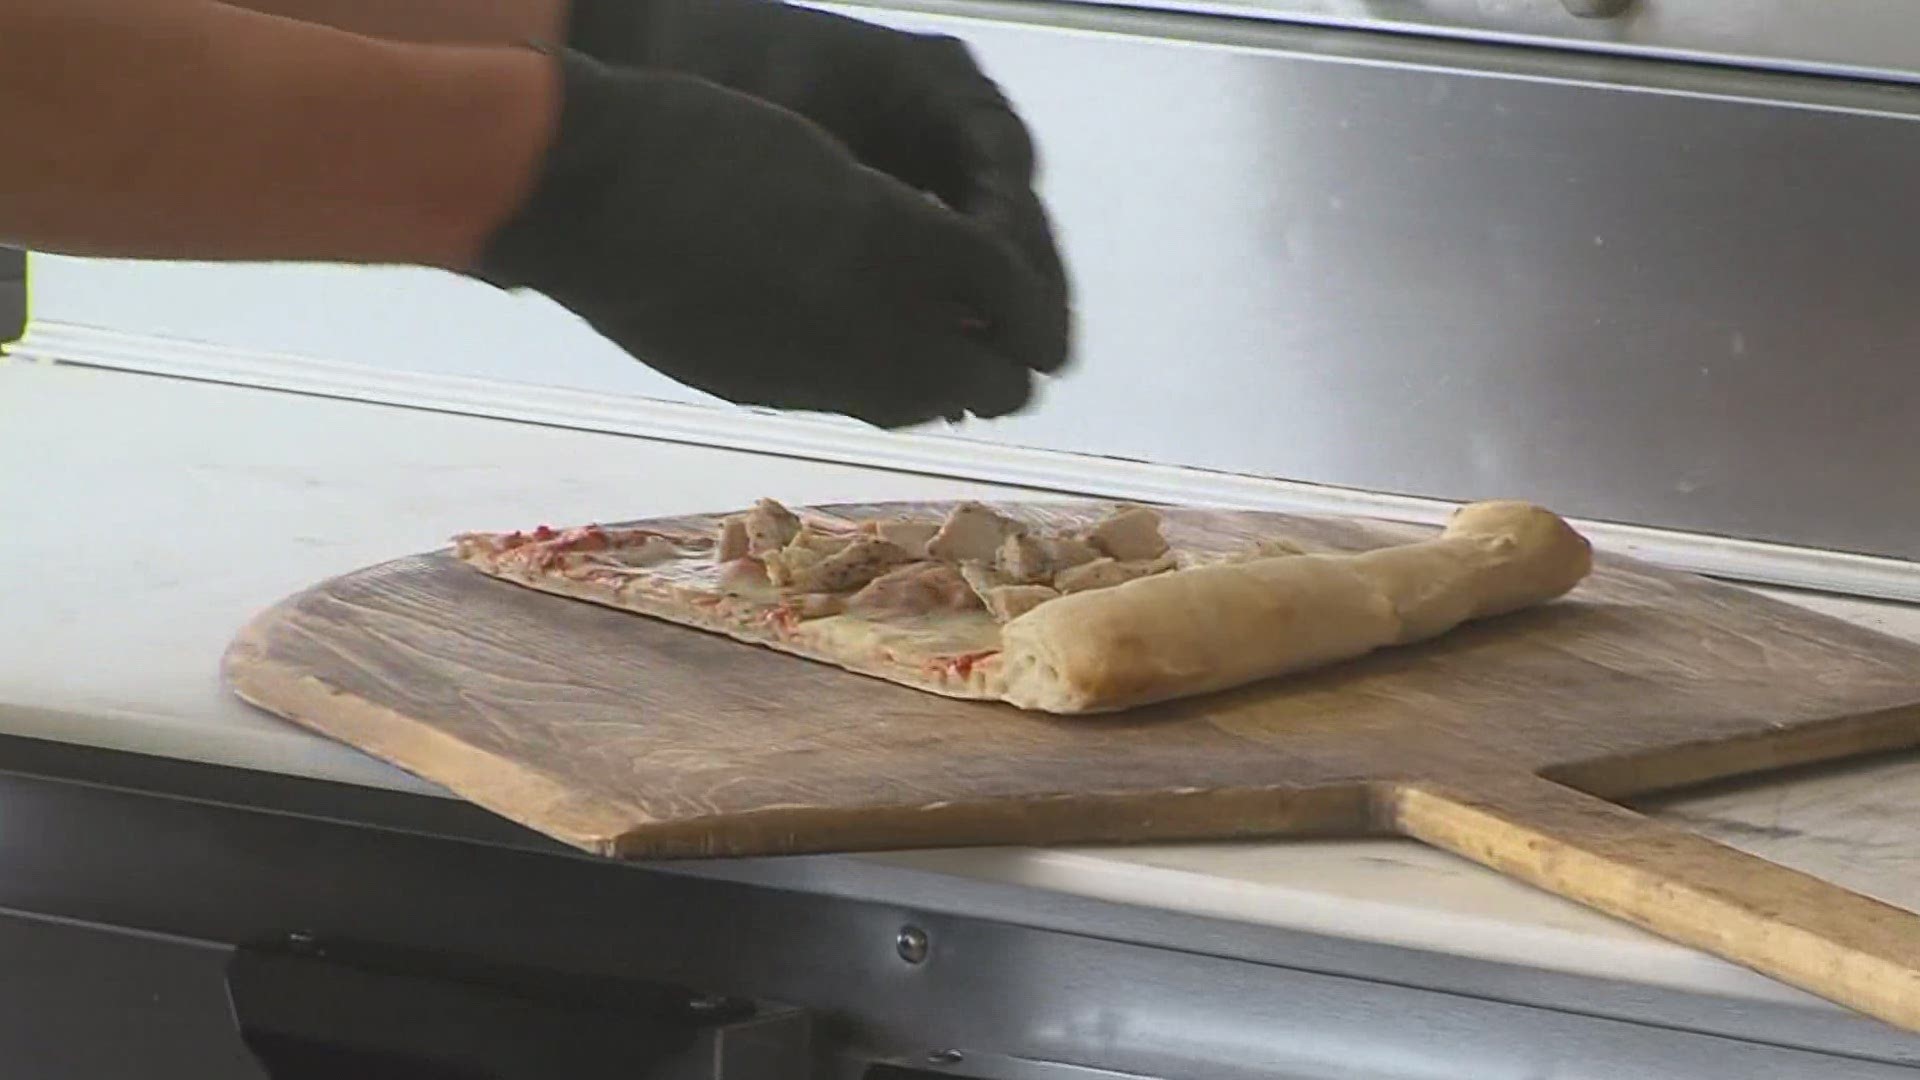 Local 5 breaks down guidance provided by the Iowa Restaurant Association.